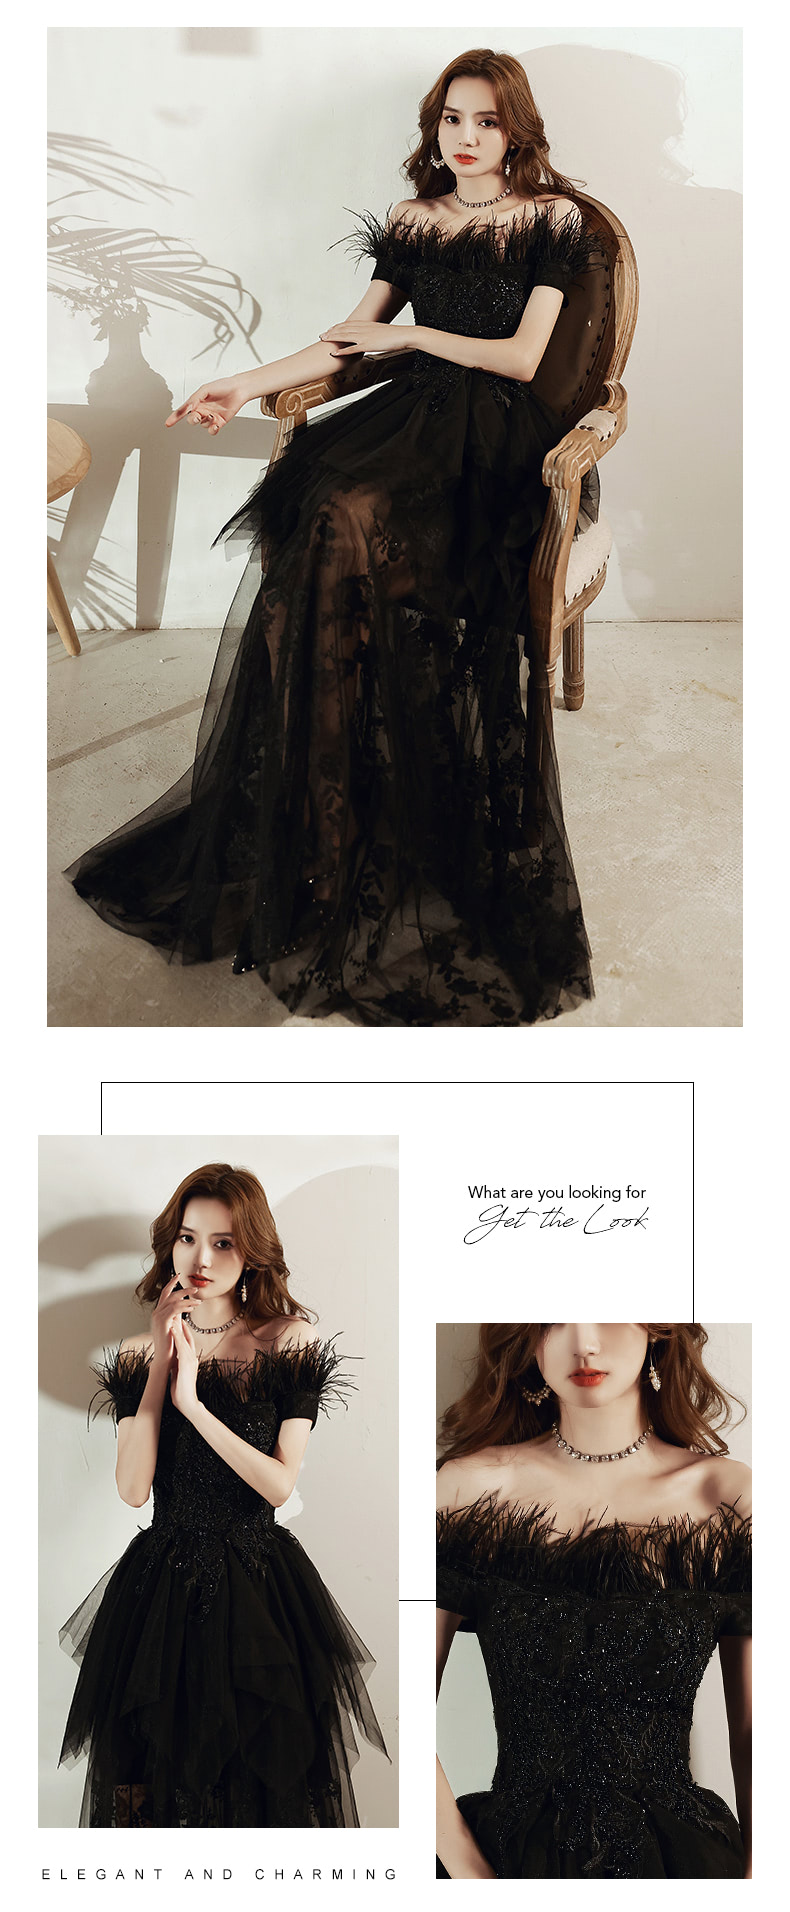 Luxury-Black-Feather-Cocktail-Prom-Dress-Evening-Party-Long-Gown11.jpg